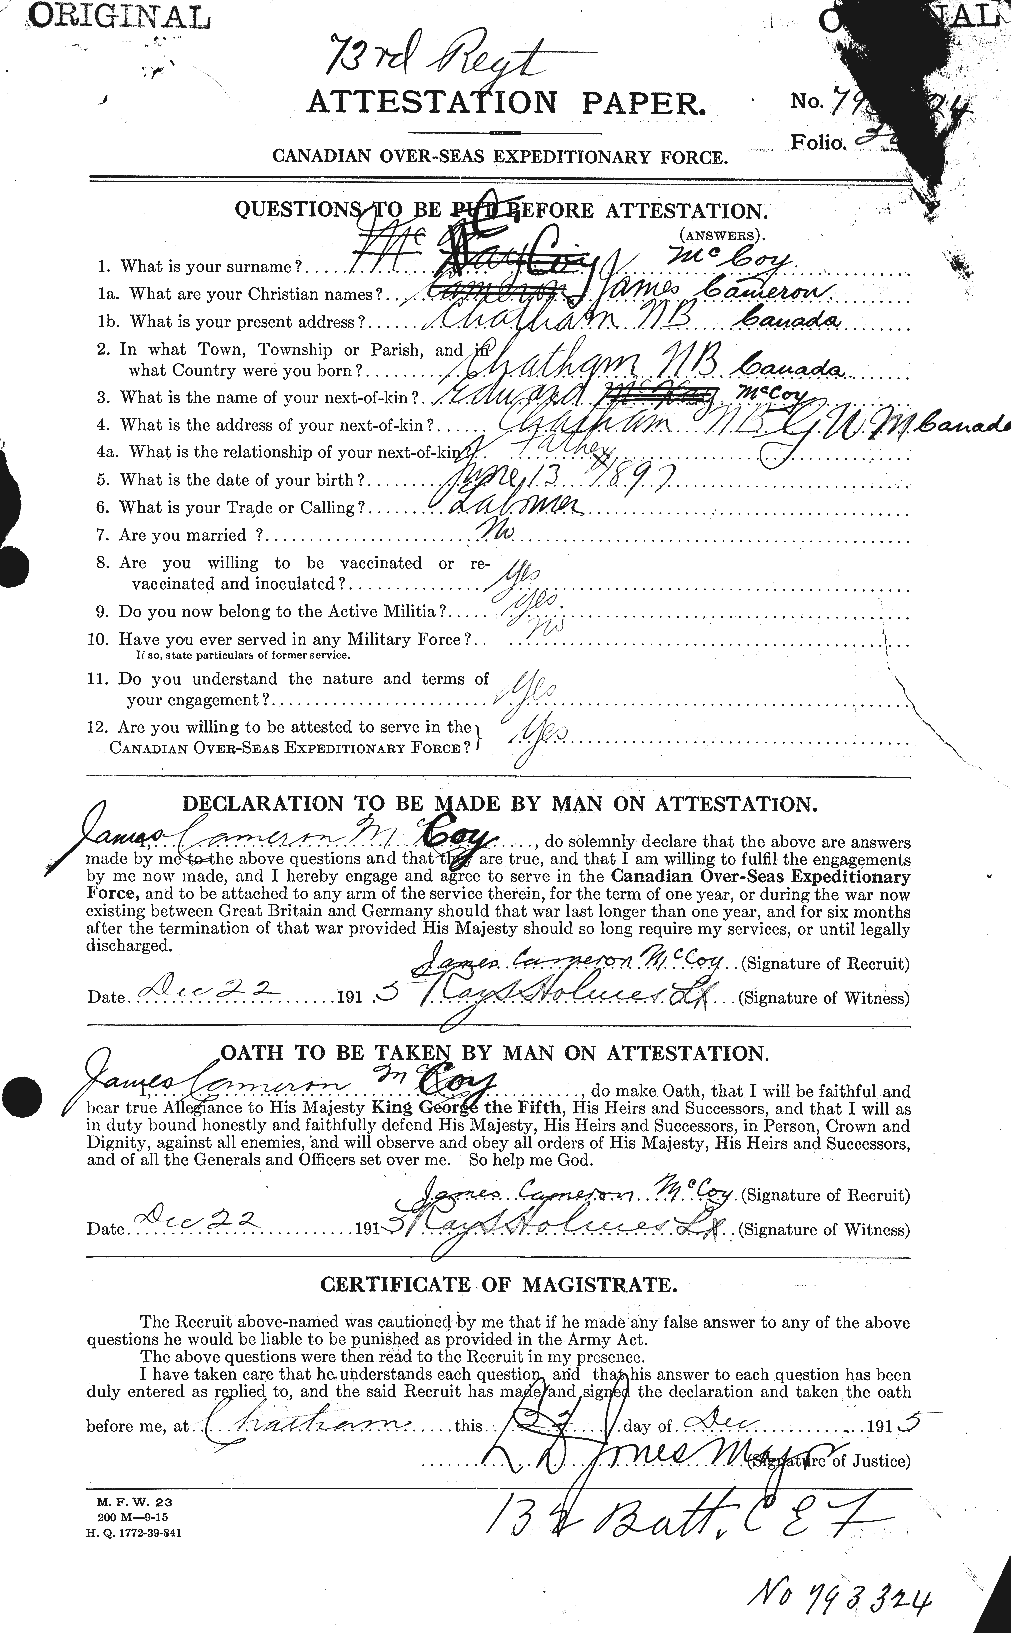 Personnel Records of the First World War - CEF 134840a